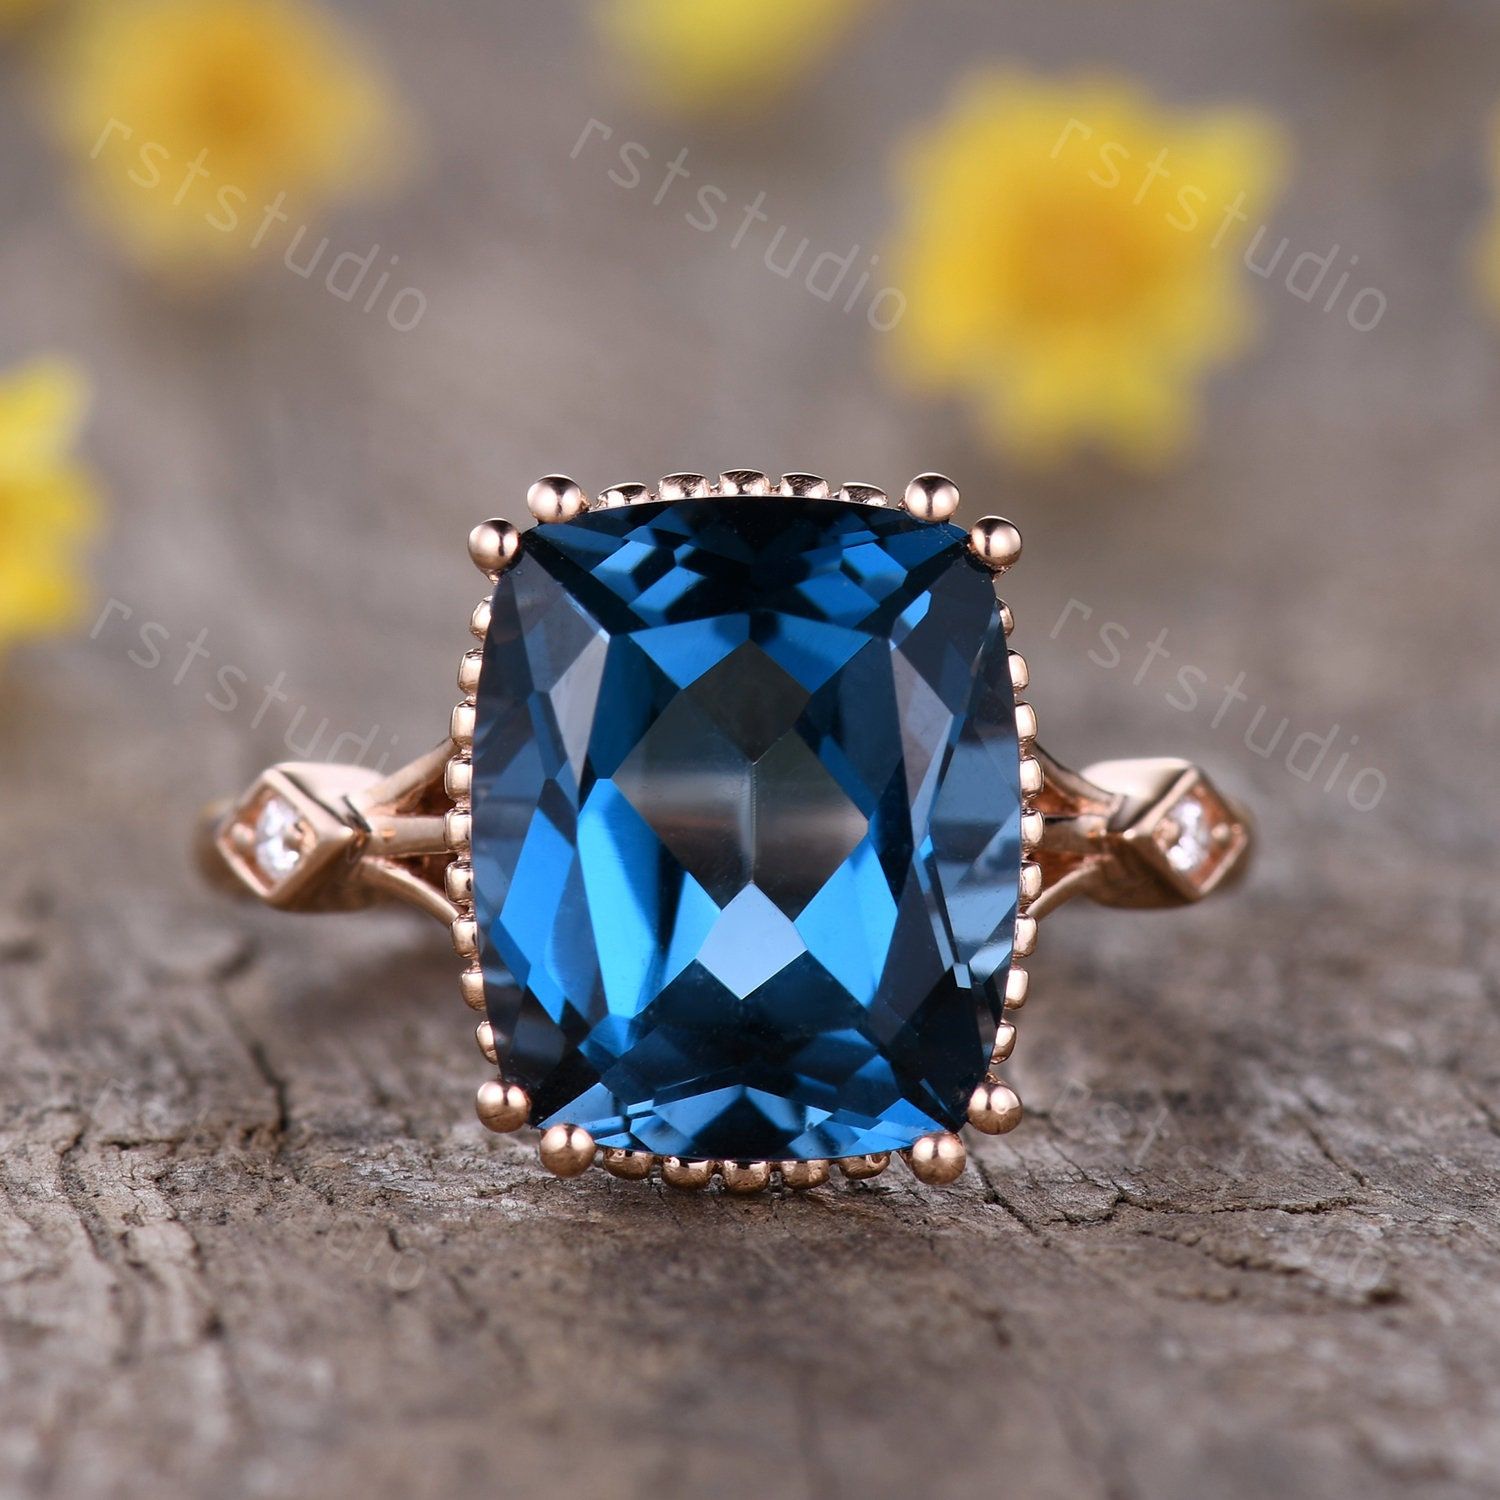 10x12mm Cushion Cut London Blue Topaz Engagement Ringblue – Etsy In Blue Topaz Rings With Braided Gold Band (View 8 of 25)